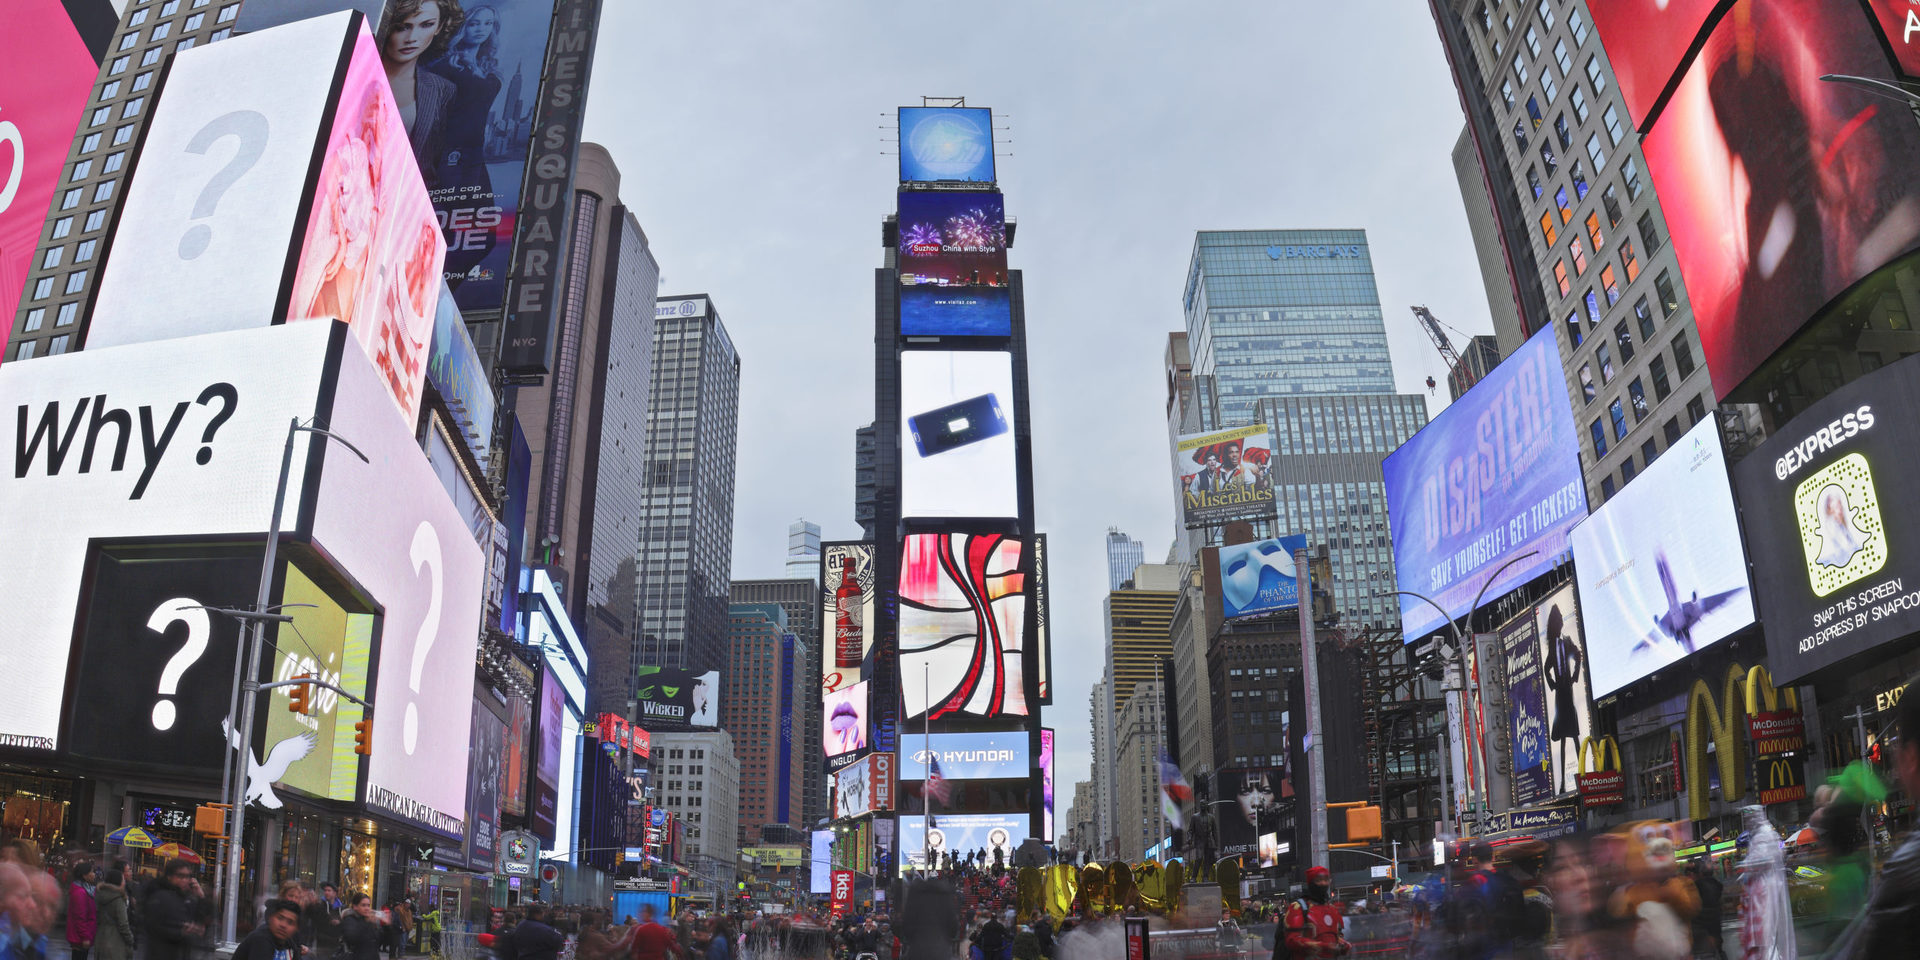 Times Square Billboards/Digital Out of Home Advertisements